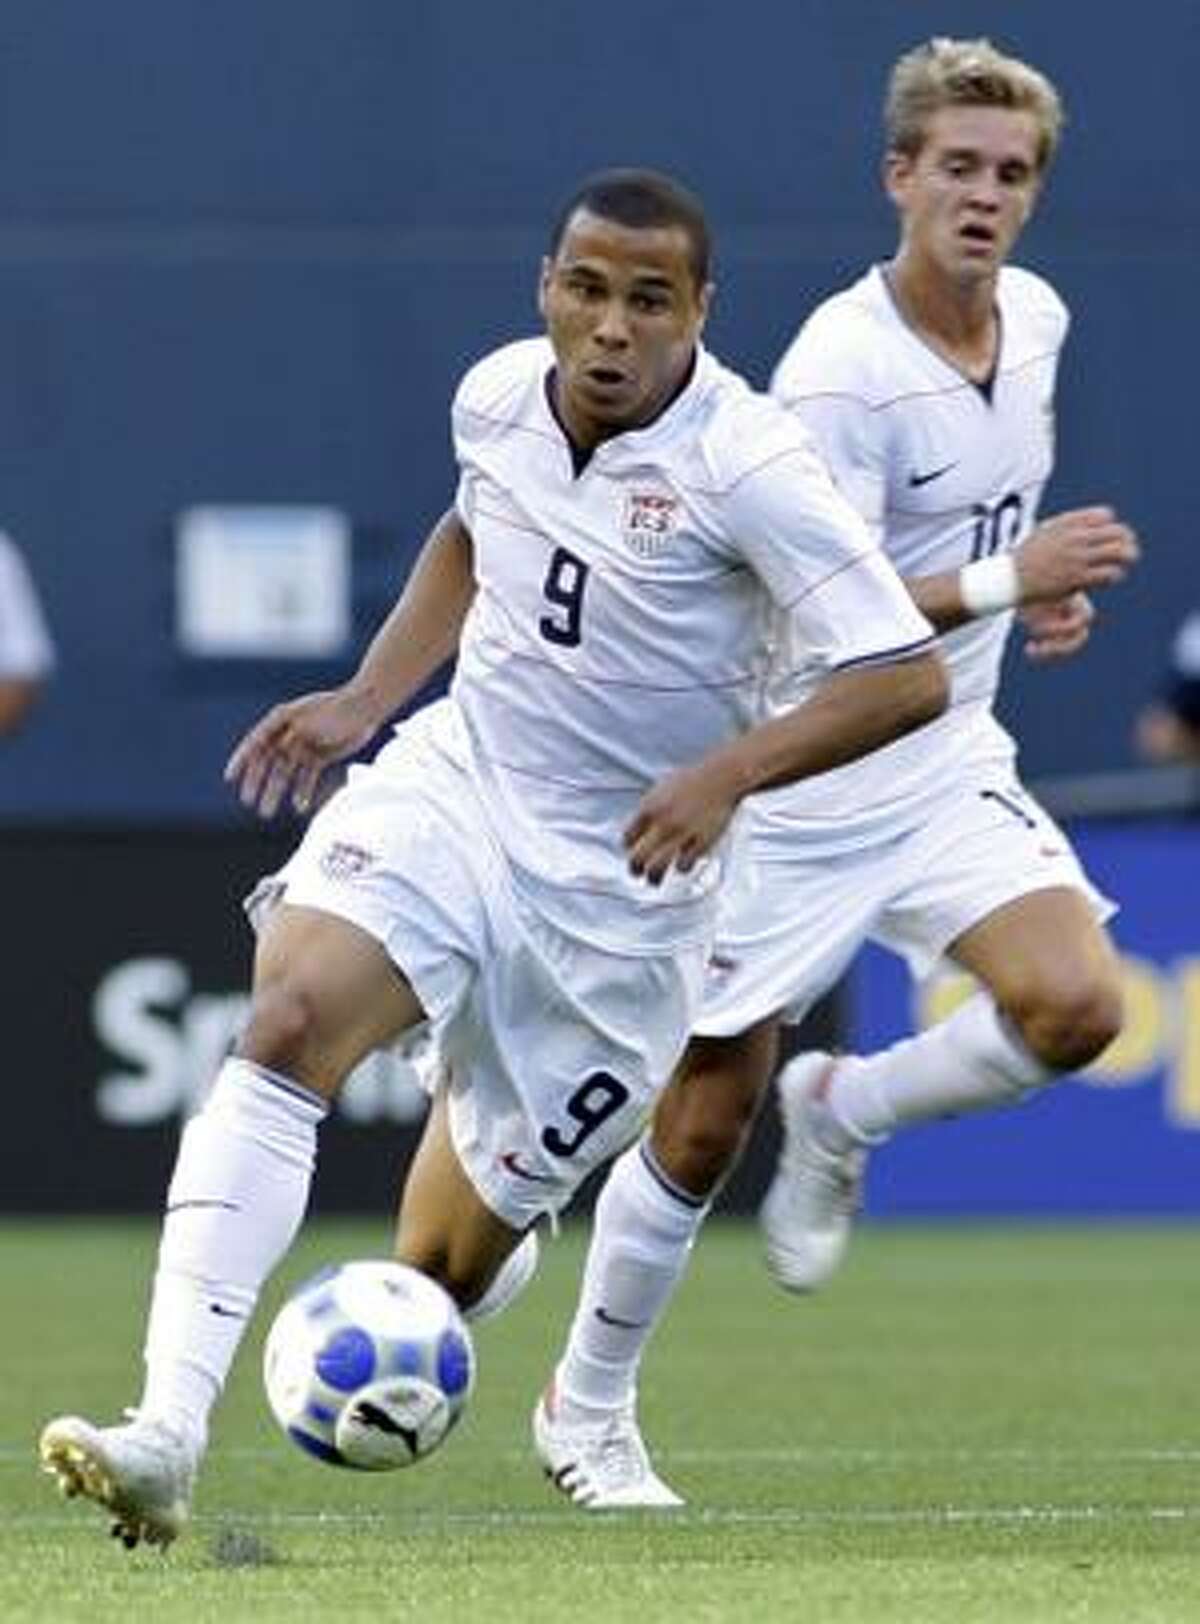 FILE - In this Oct. 13, 2009, file photo, United States' Charlie Davies, left, controls the ball as teammate Stuart Holden looks on during a CONCACAF Gold Cup soccer match against Grenada at Qwest Field in Seattle. Davies, sidelined since a accident last October, was omitted from the United States World Cup soccer training camp, US Soccer announced on Tuesday, May 11, 2010. (AP Photo/Ted S. Warren, File)